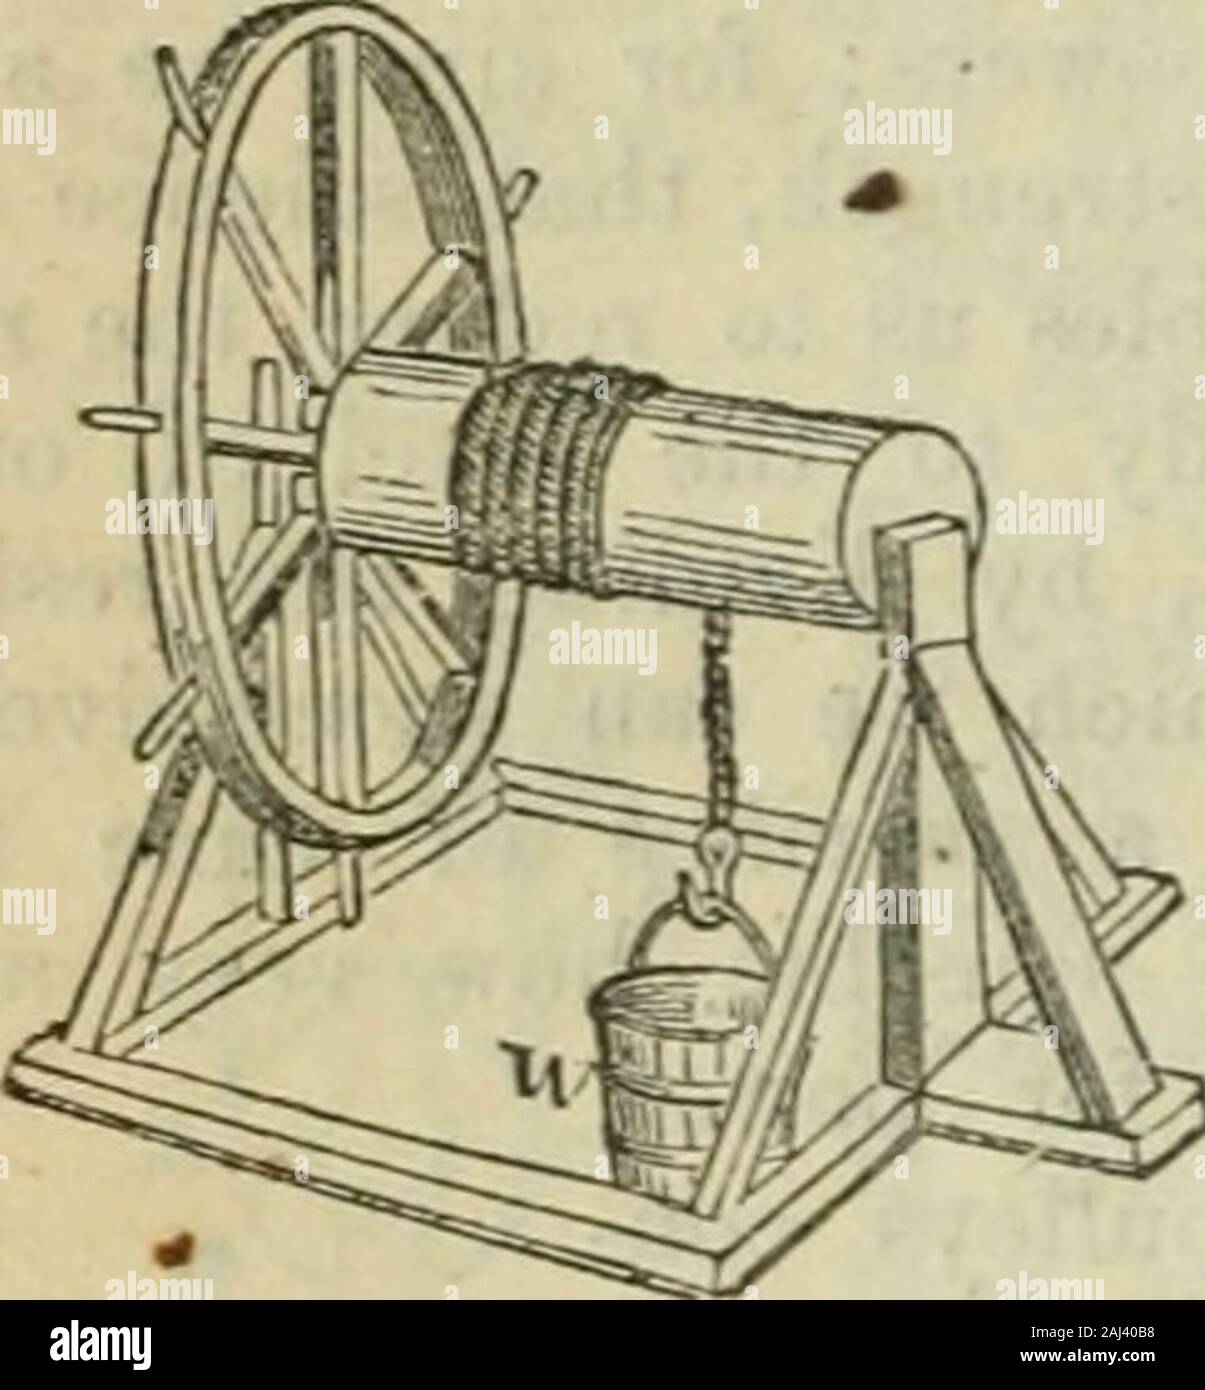 Fifth book of lessons for the use of schools . ell, which is to be raised by winding the rope, towhich it is attached, roundthe axle; if this be donewithout a wheel to. turn theaxle, no mechanical assist-ance is received. The axlewithout . a wheel is as im-potent as a single fixed pul-ley, or lever, whose fulcrumis in the centre; but addthe wheel to the axle, and• you will immediately find thebucket is raised with muchless difficulty. The axle actsthe part of the shorter arm of the lever, the wheel thatof the longer arm. The velocity of the circumferenceof the wheel is as much greater than tha Stock Photo